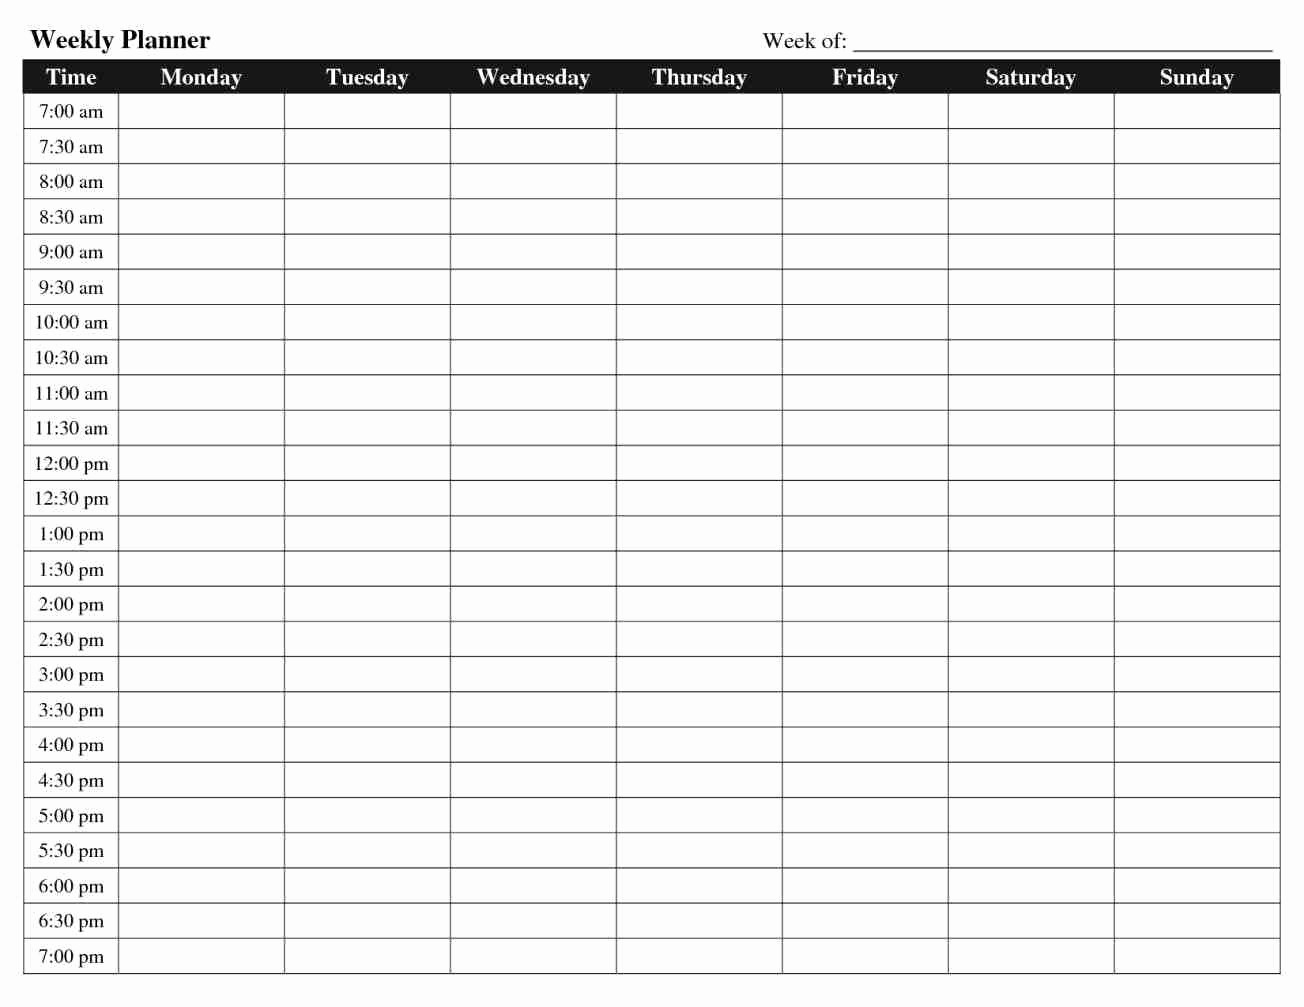 Weekly Schedule by Hour Template Elegant Hourly Schedule Template